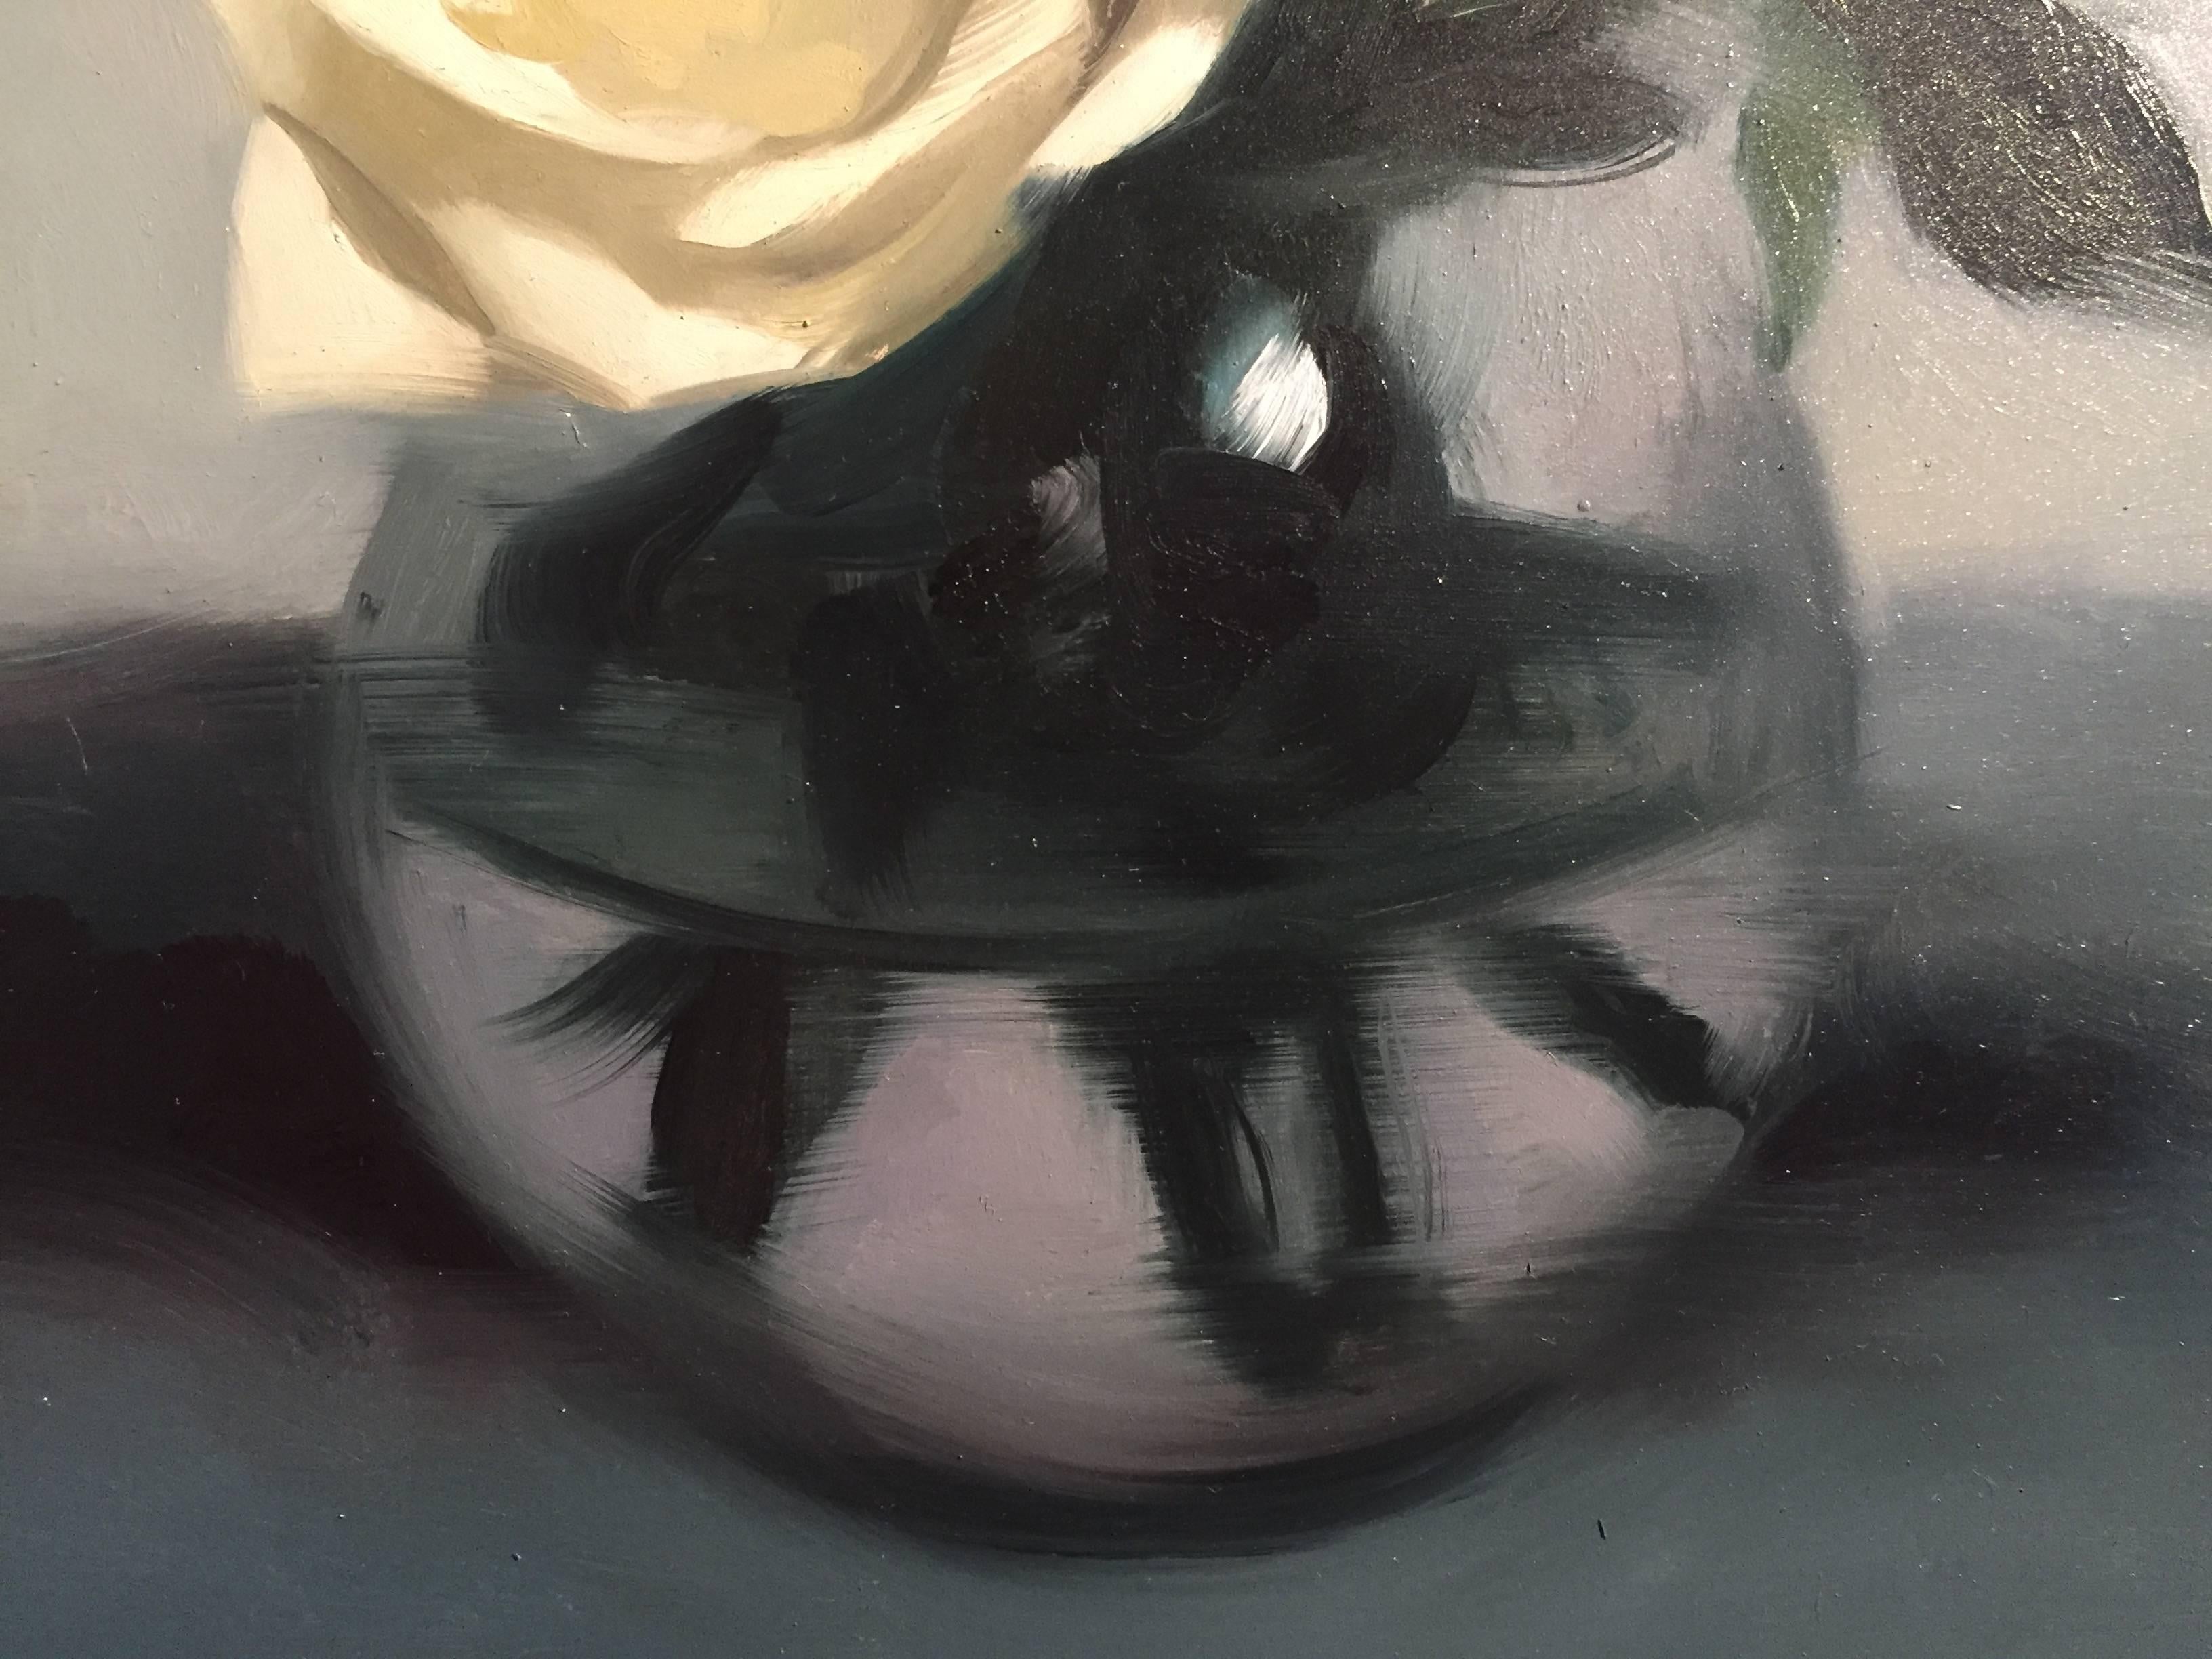 A still life painting of creamy white roses in full bloom, against a lavender, blue, background. Arranged in a bulbous round vase, which reflects light from above.

Born in Memphis, Tennessee in 1980 Bauman's family soon after that relocated to